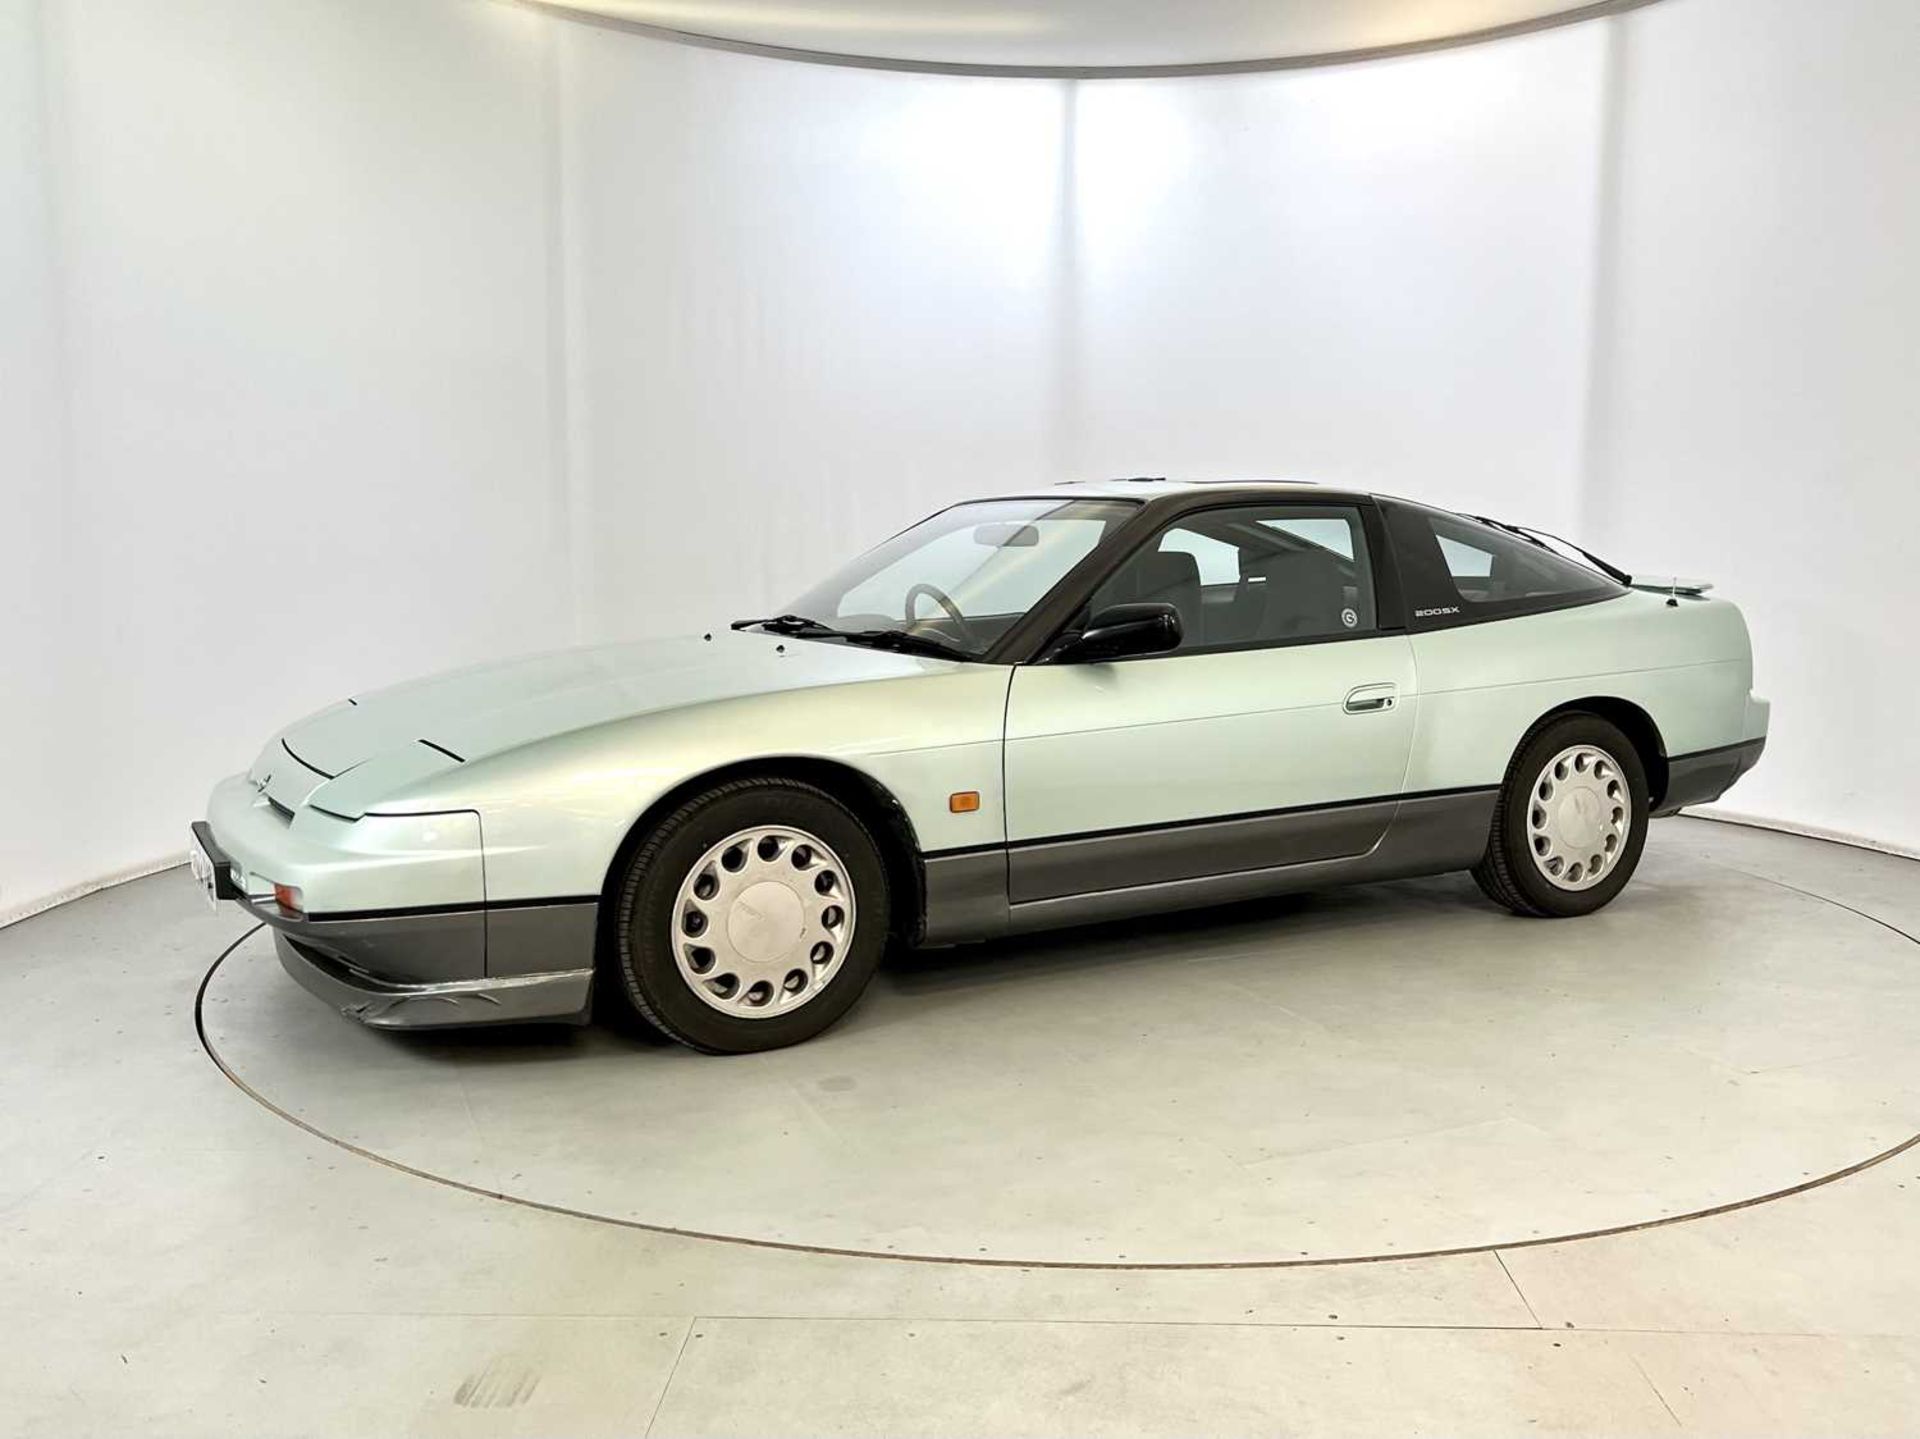 1990 Nissan 200SX - Image 4 of 30